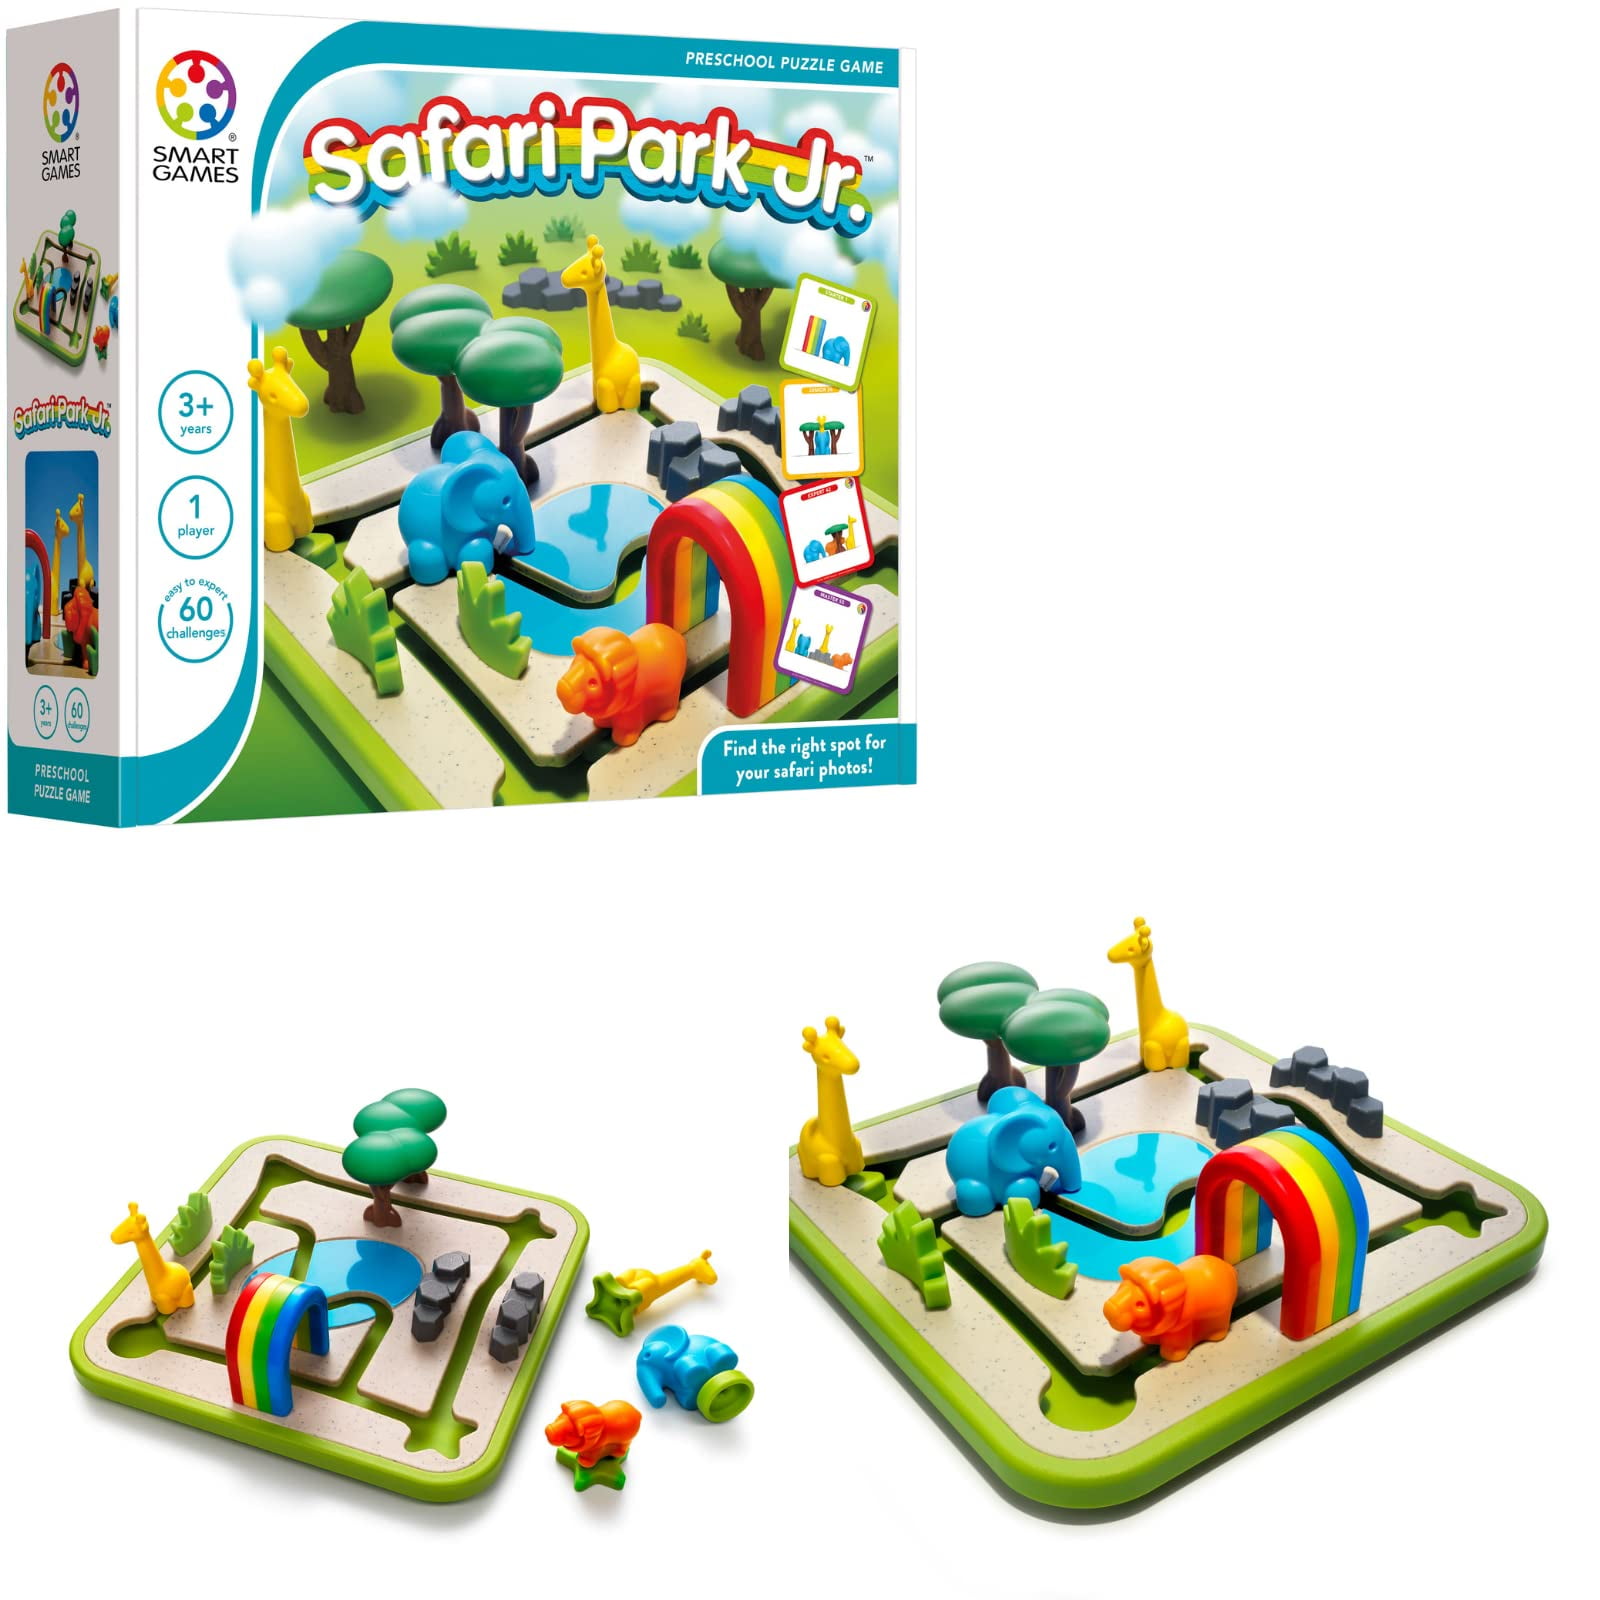 SmartGames Safari Park Jr. Preschool Puzzle Game with 60 Challenges for  Ages 3 and Up 